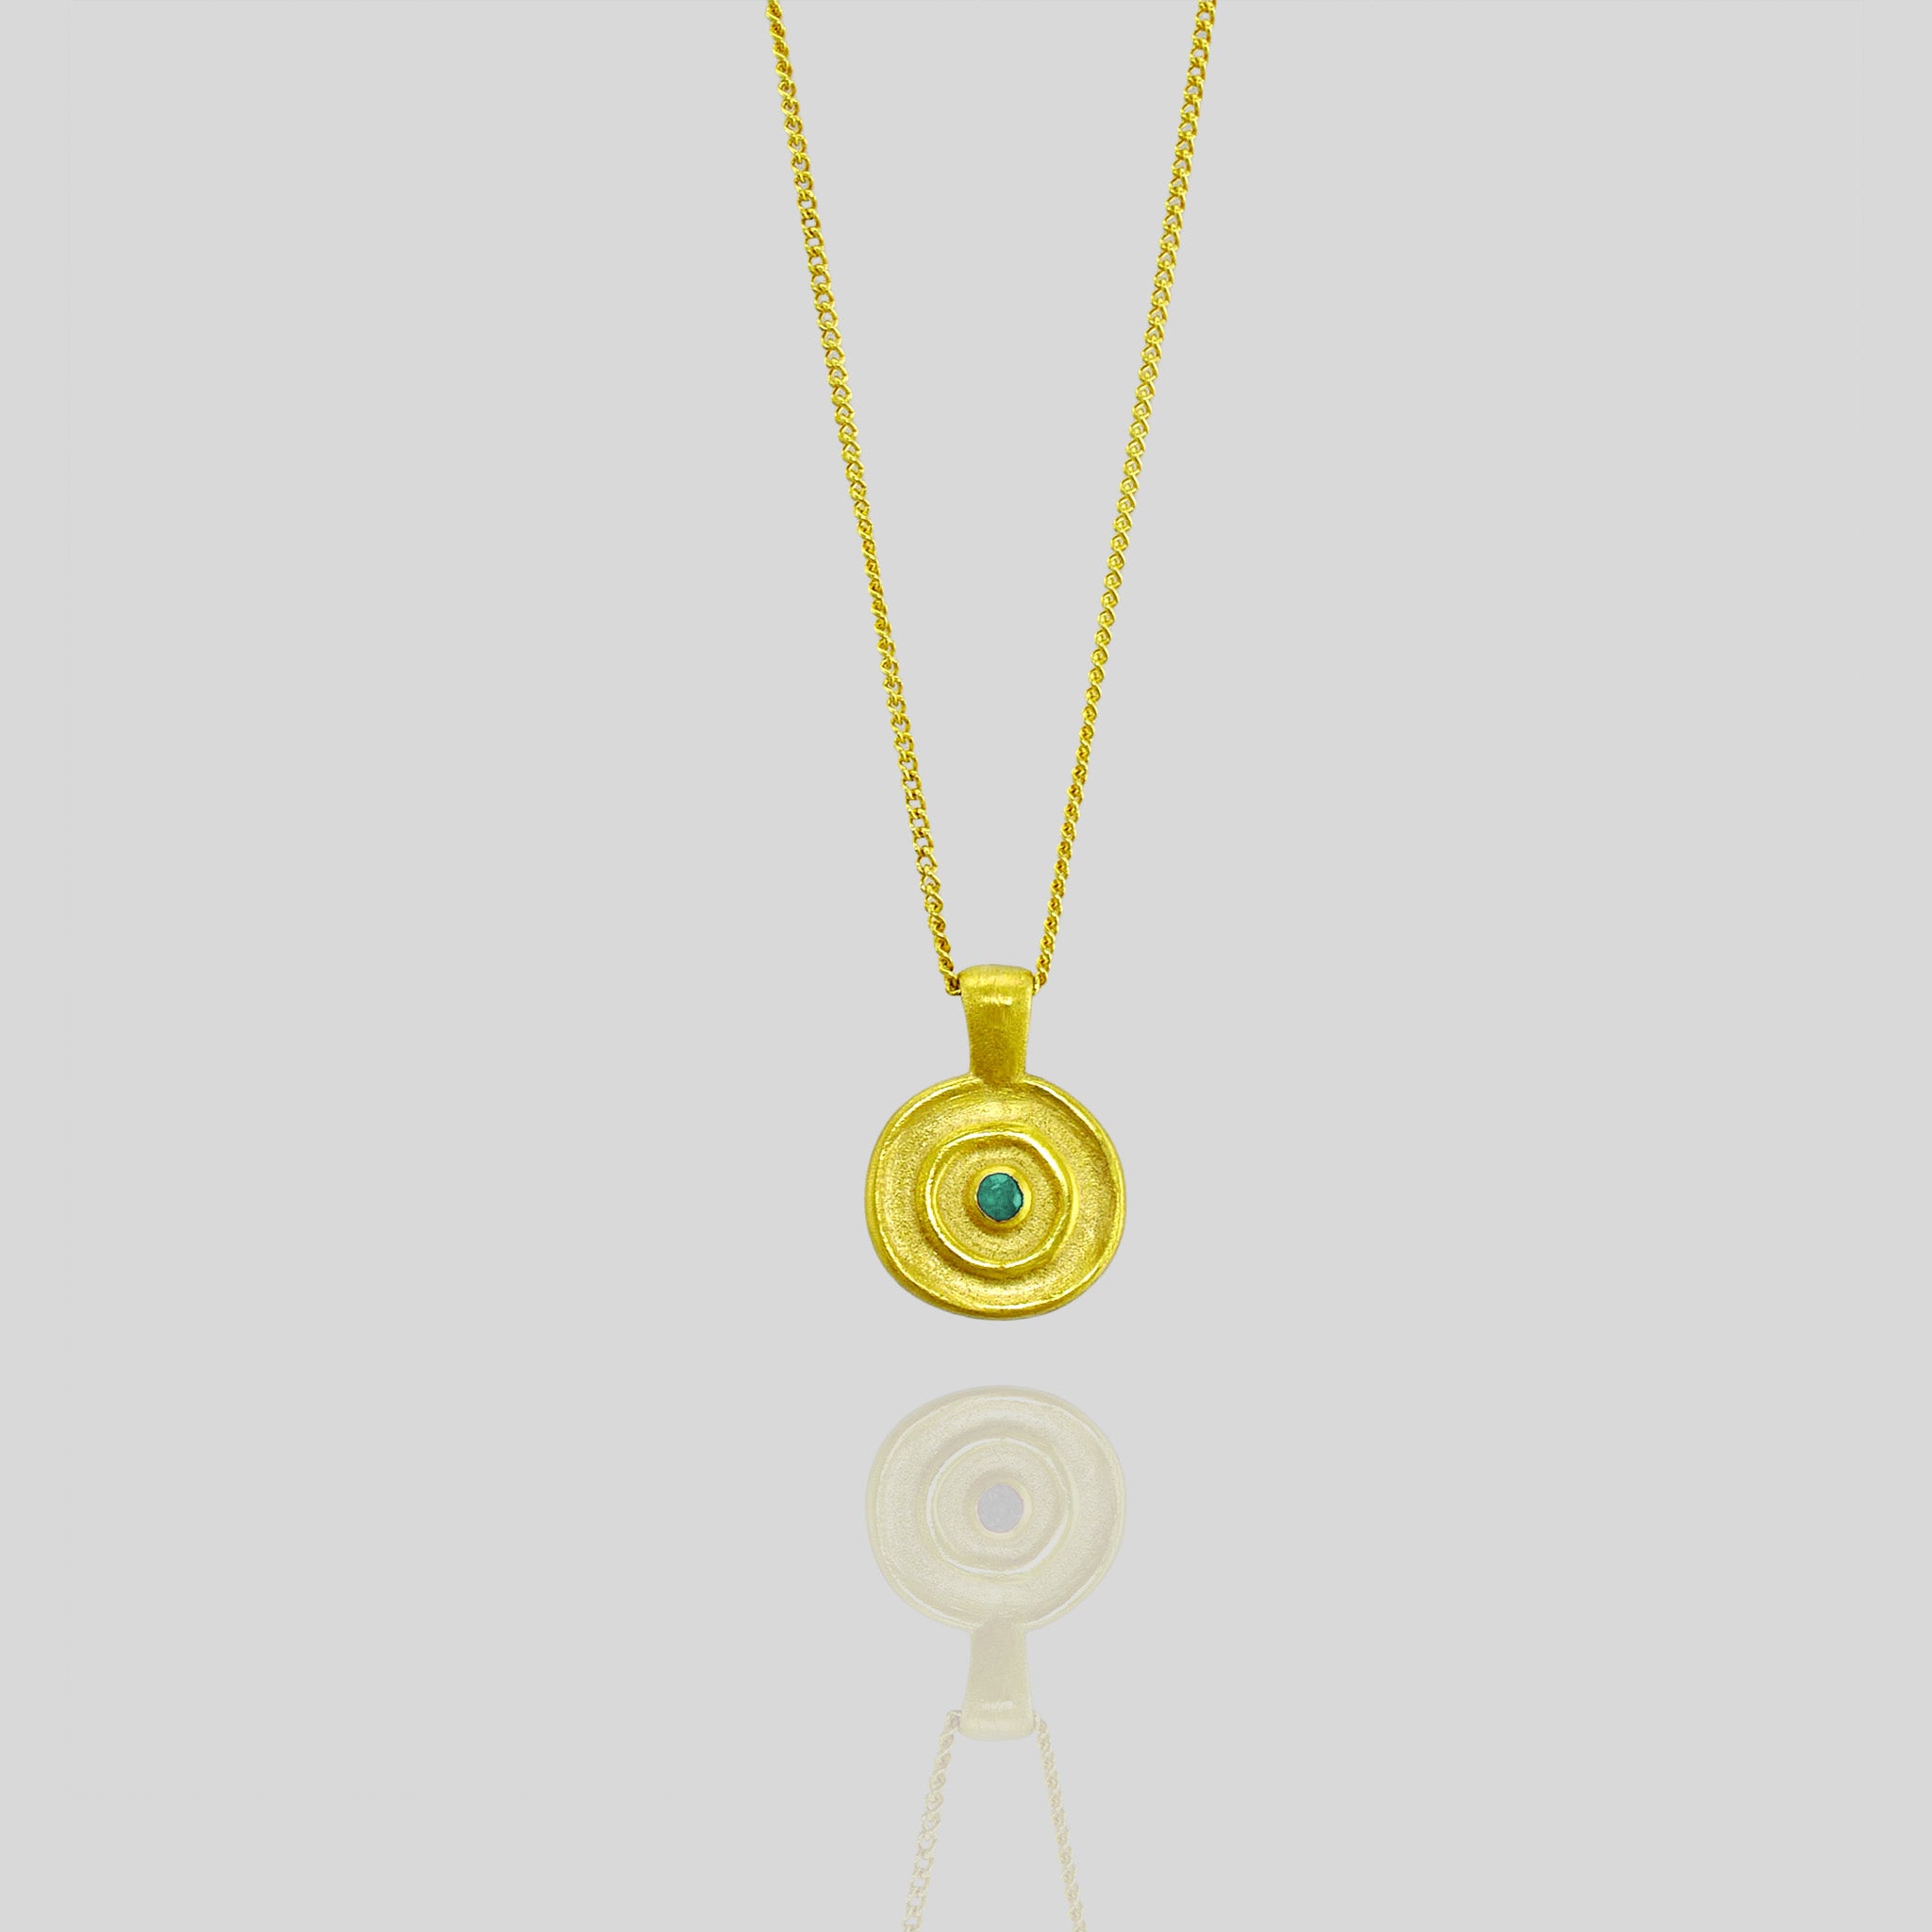 Pharaohs II - Exquisite handmade round gold pendant with a central Emerald gemstone, inspired by the timeless elegance of ancient Egyptian Pharaohs' gold jewelry, crafted from Yellow Gold.